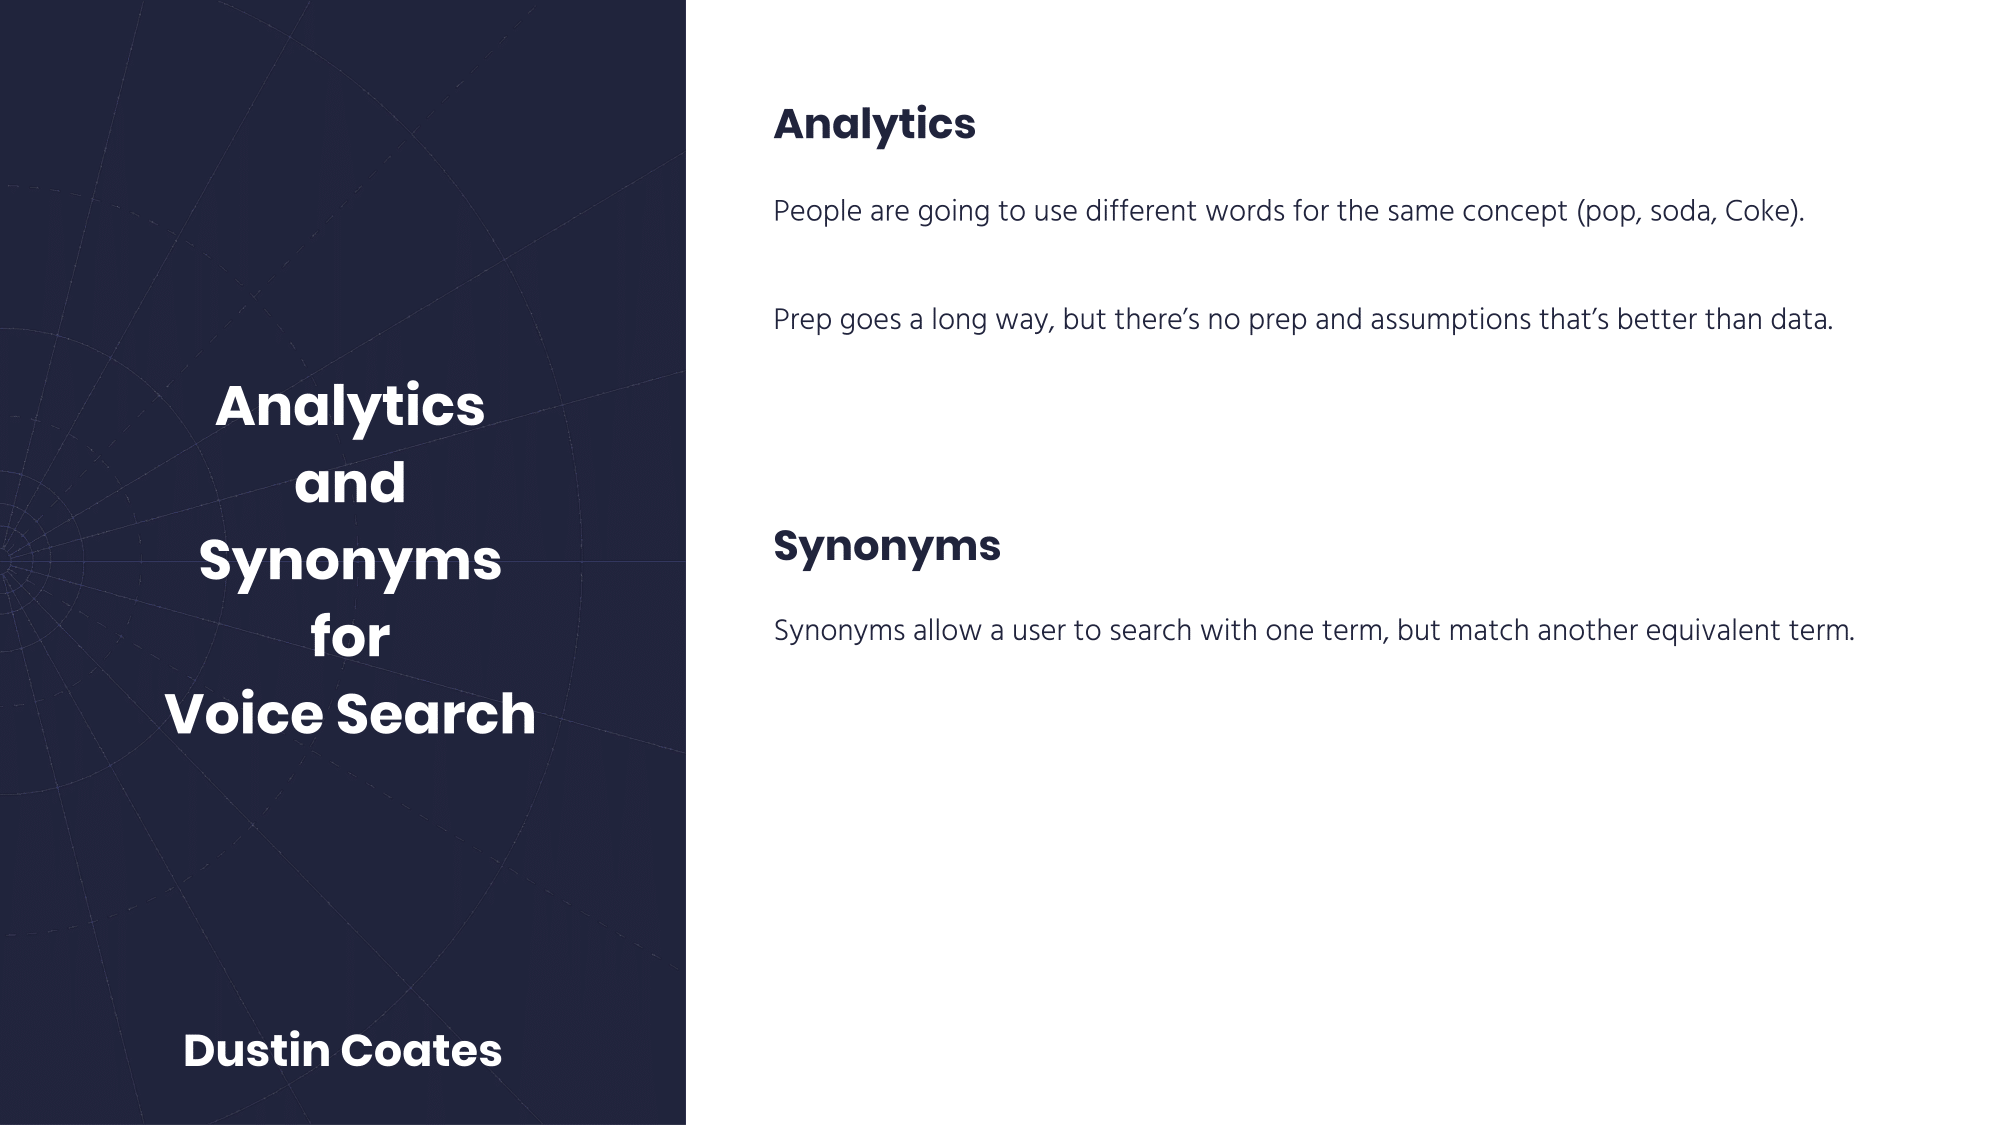 Analytics and synonyms